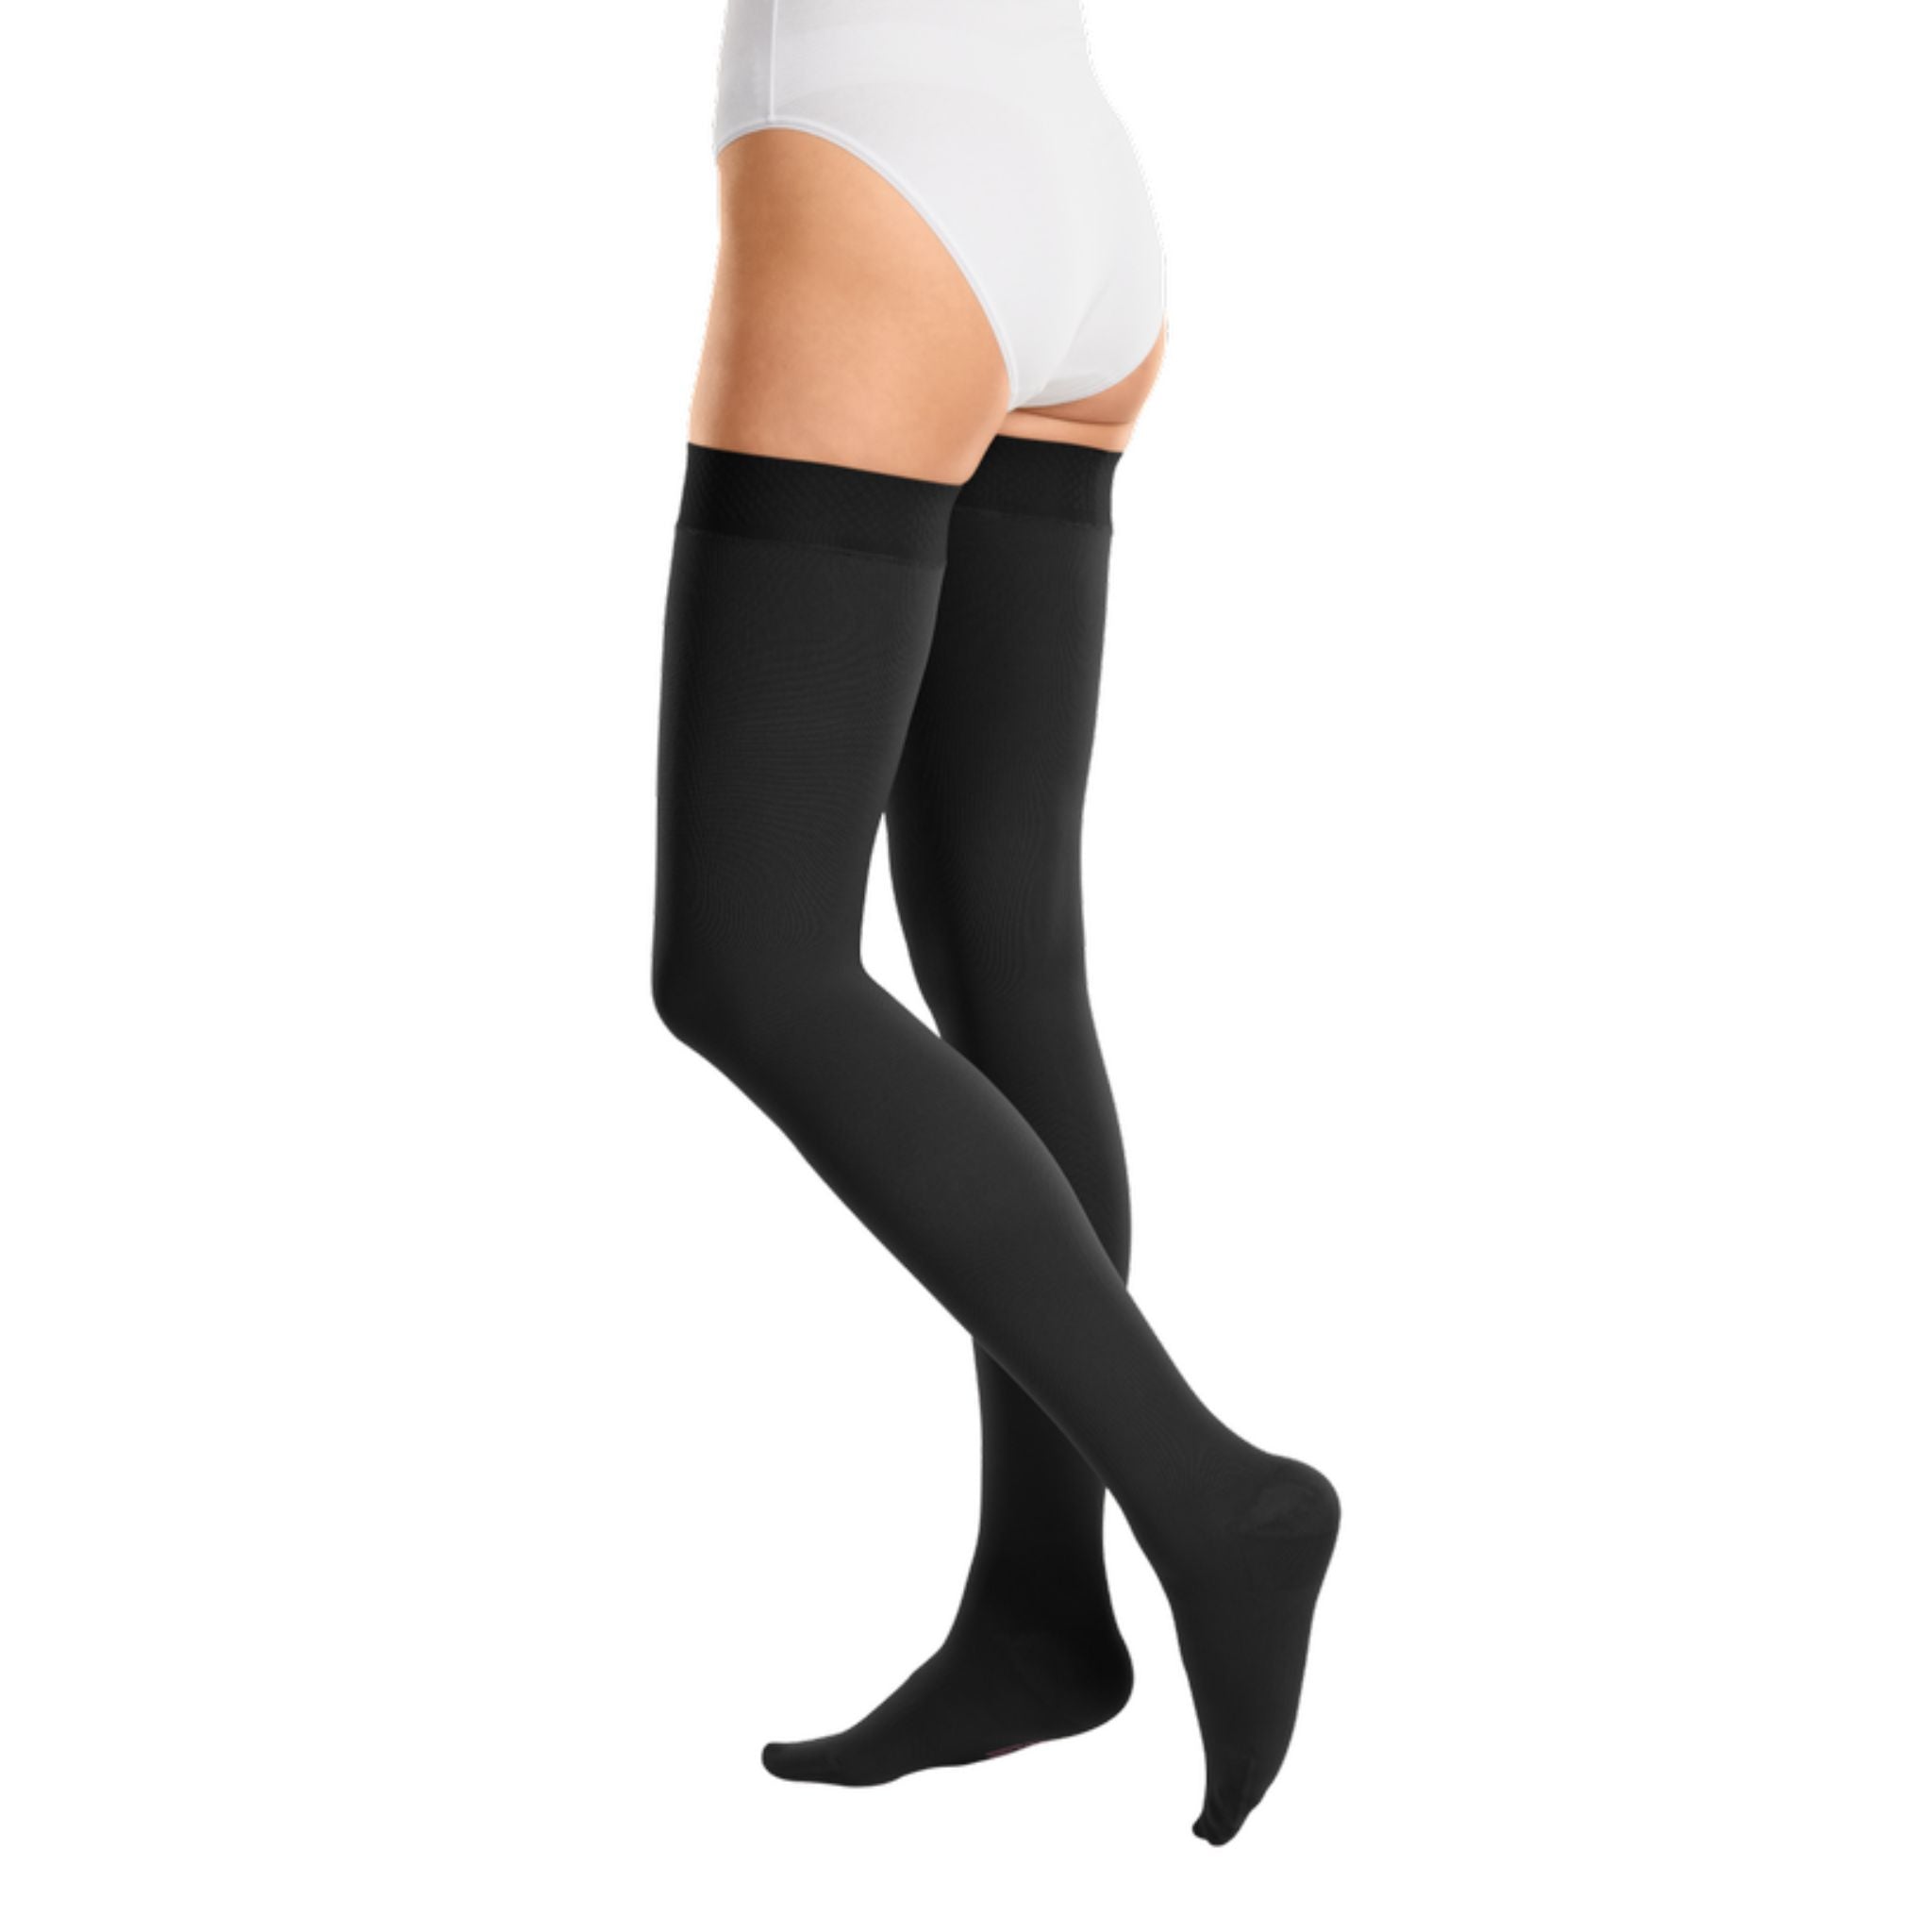 Compression Stockings | Thigh High | Silicone Topband Wide | Open Toe | Black | mediven cotton